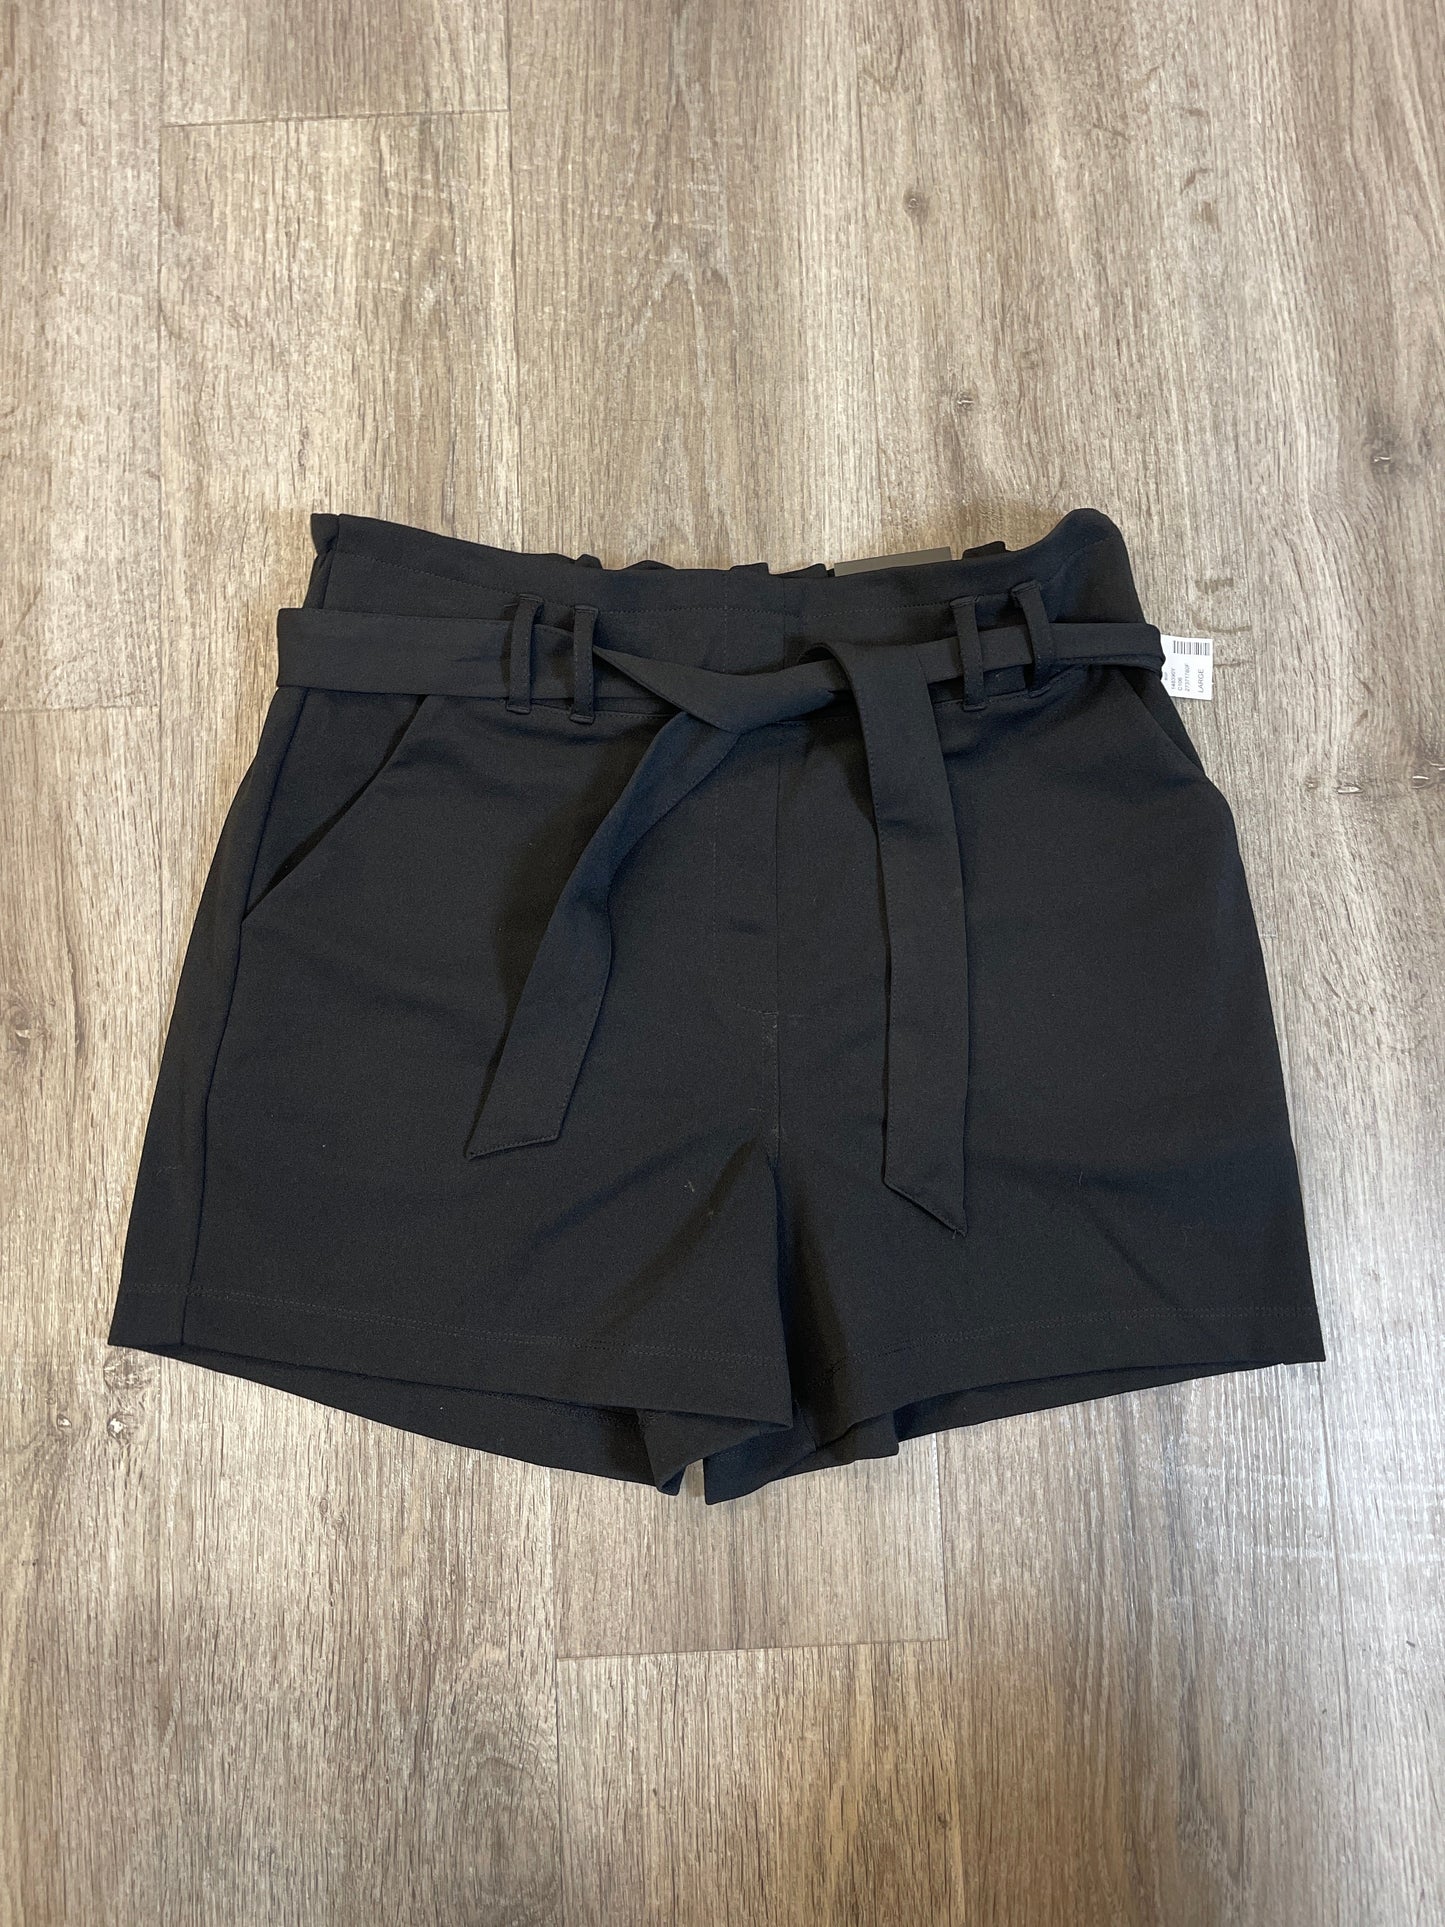 Shorts By Maurices  Size: L